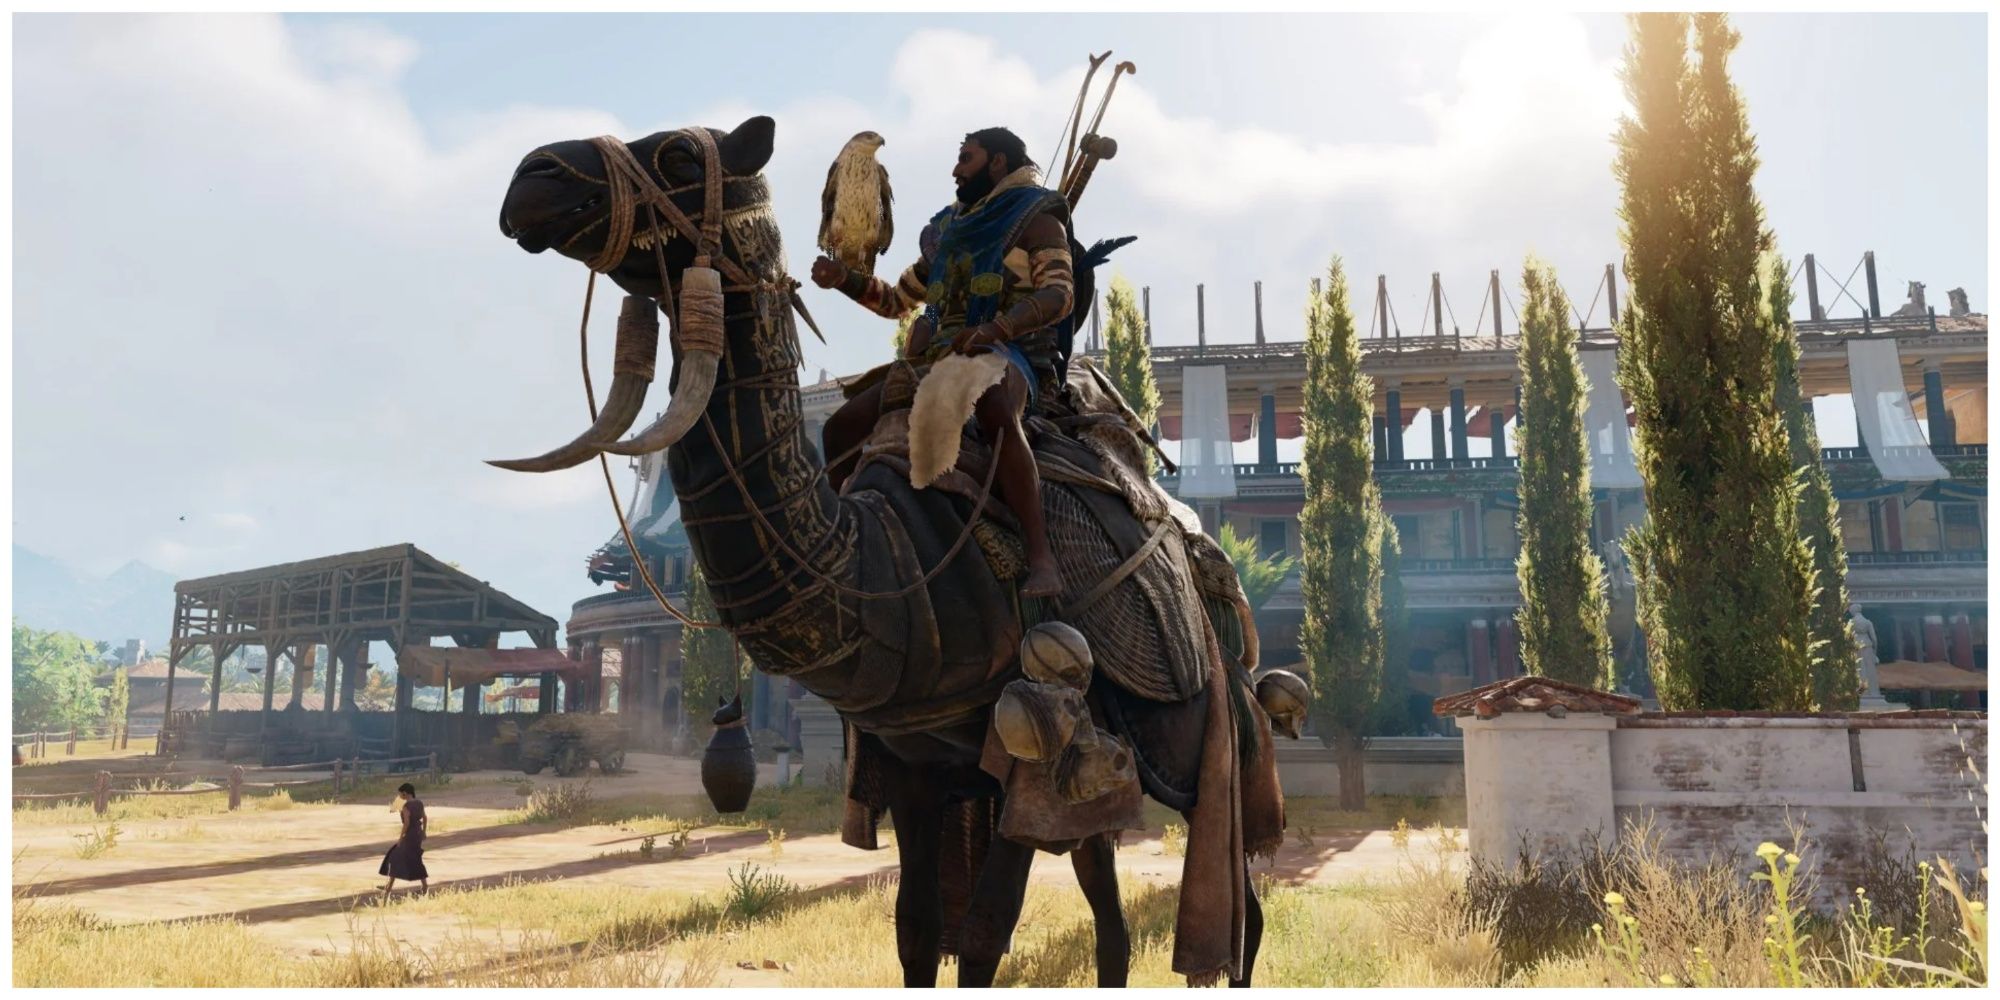 Assassin's creed origins bayek on a camel in front of a building